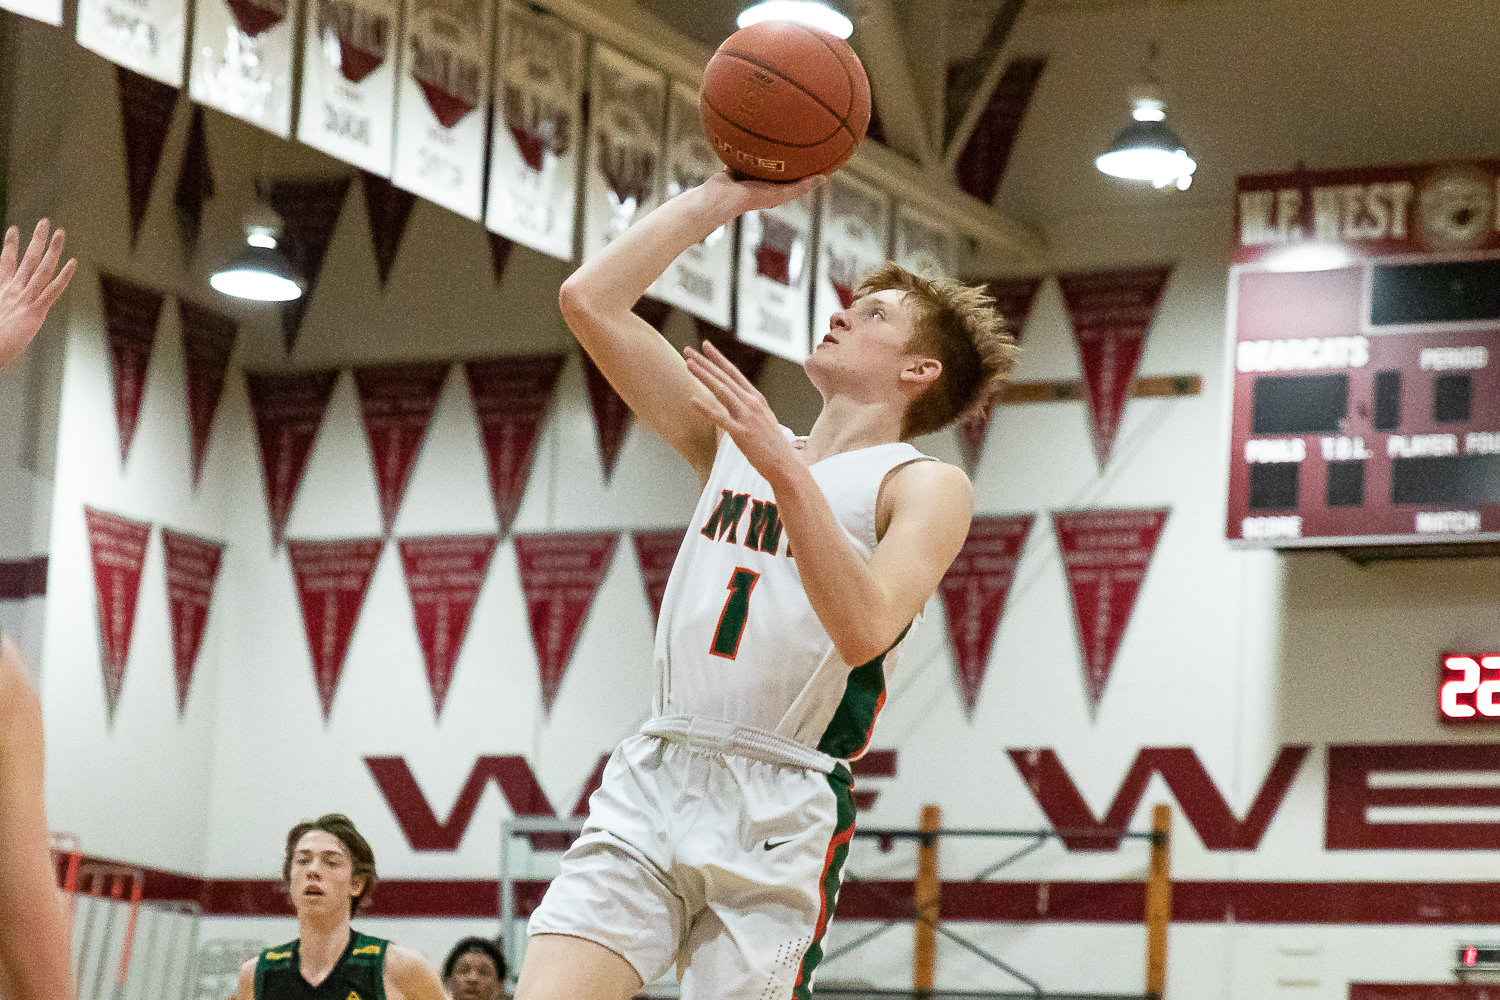 Morton-White Pass guard Jake Cournyer rises for a floater in an opening round of state matchup against Northwest Christian (Colbert) at W.F. West Feb. 25.